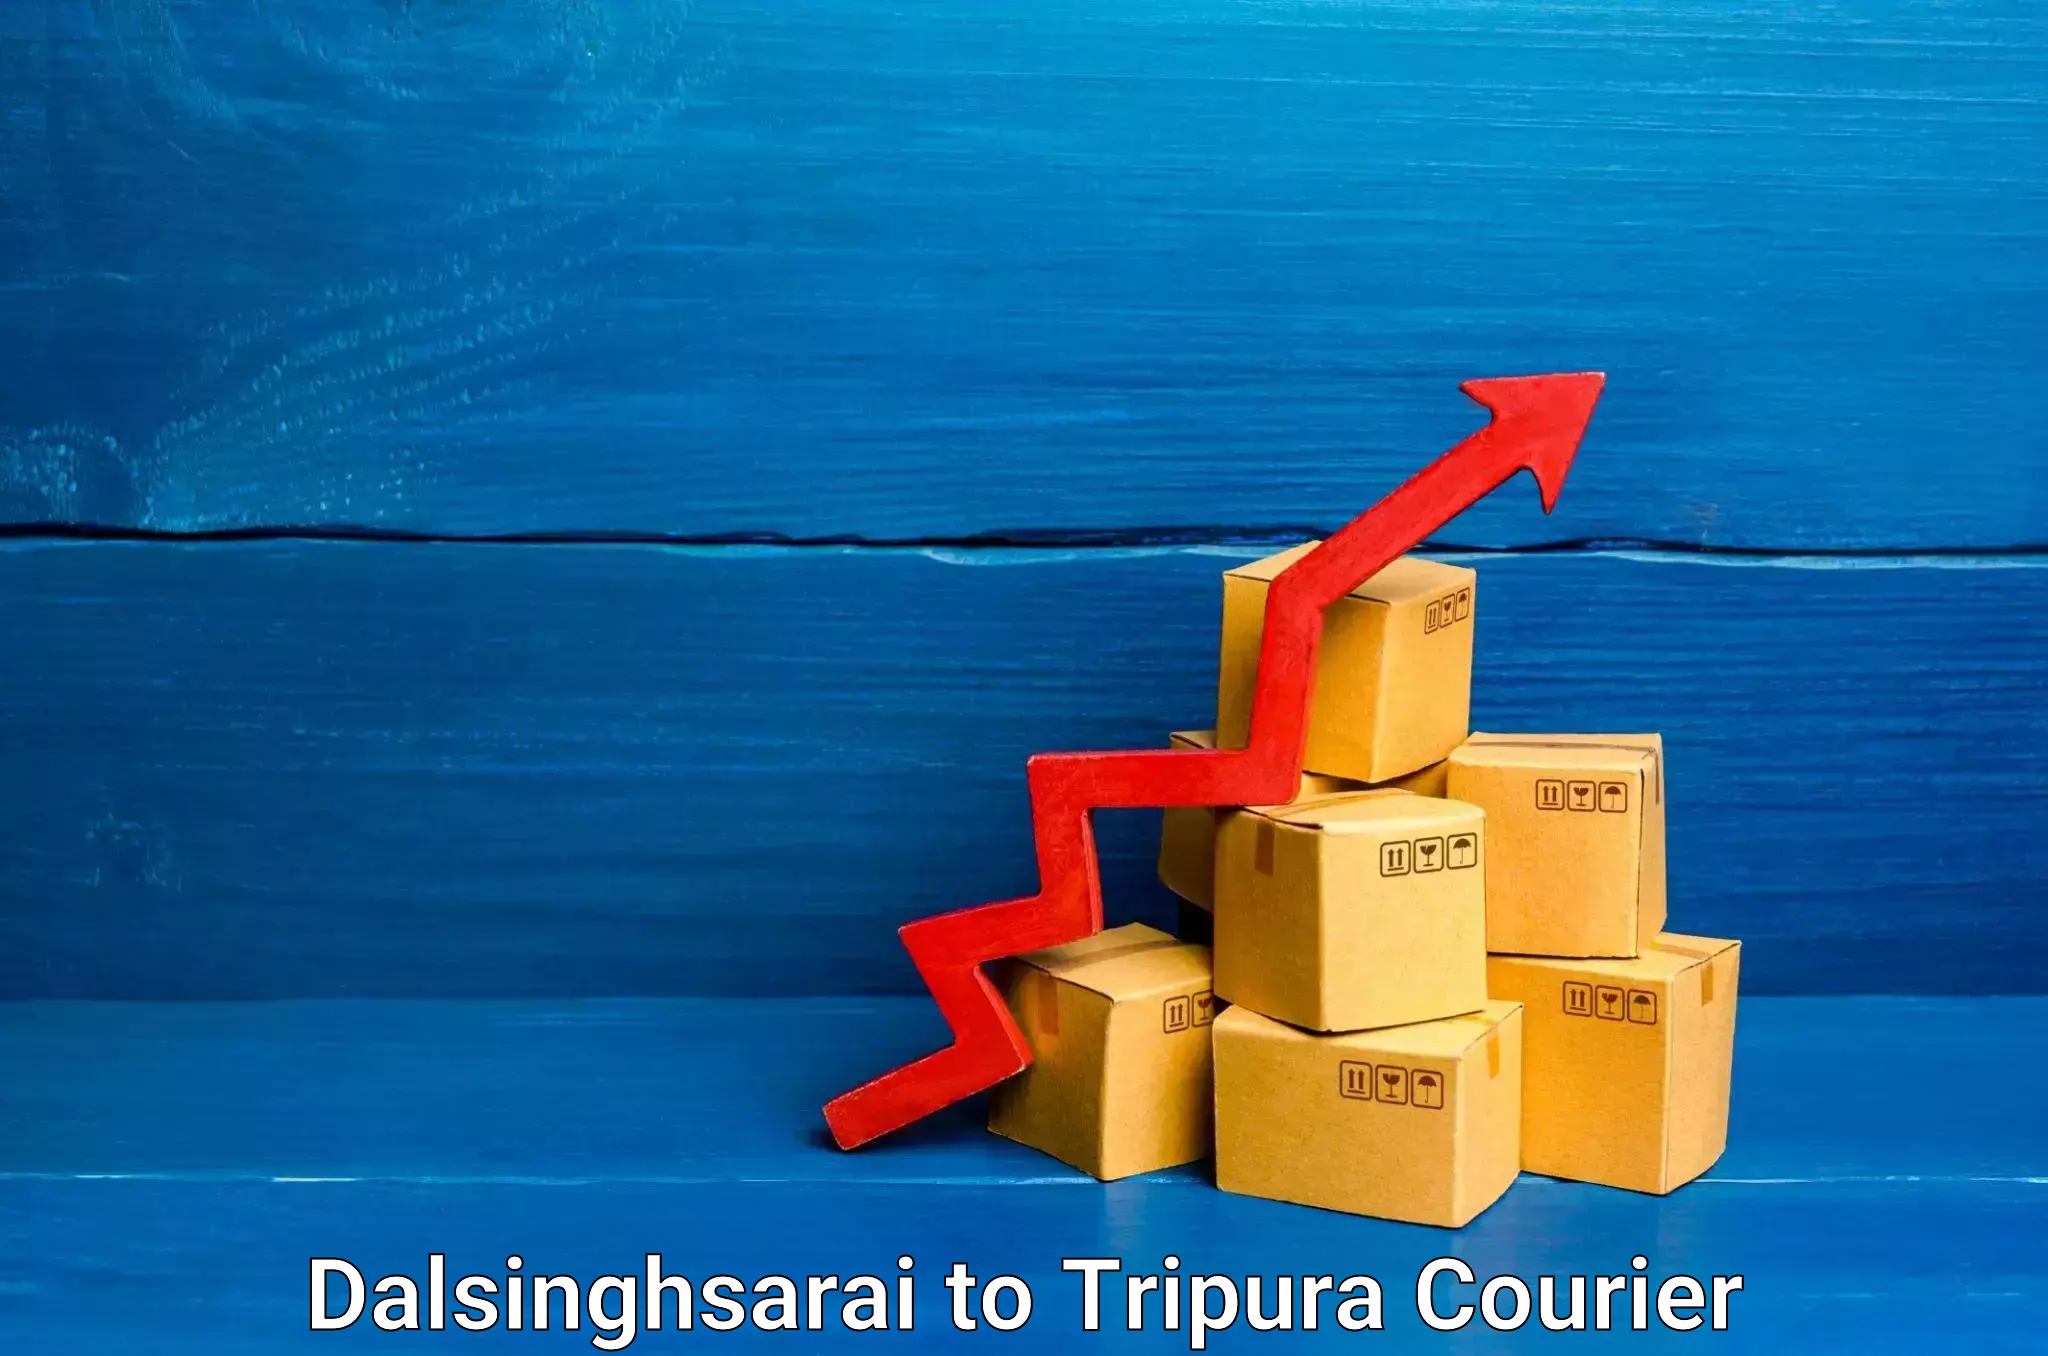 Moving and packing experts Dalsinghsarai to Agartala